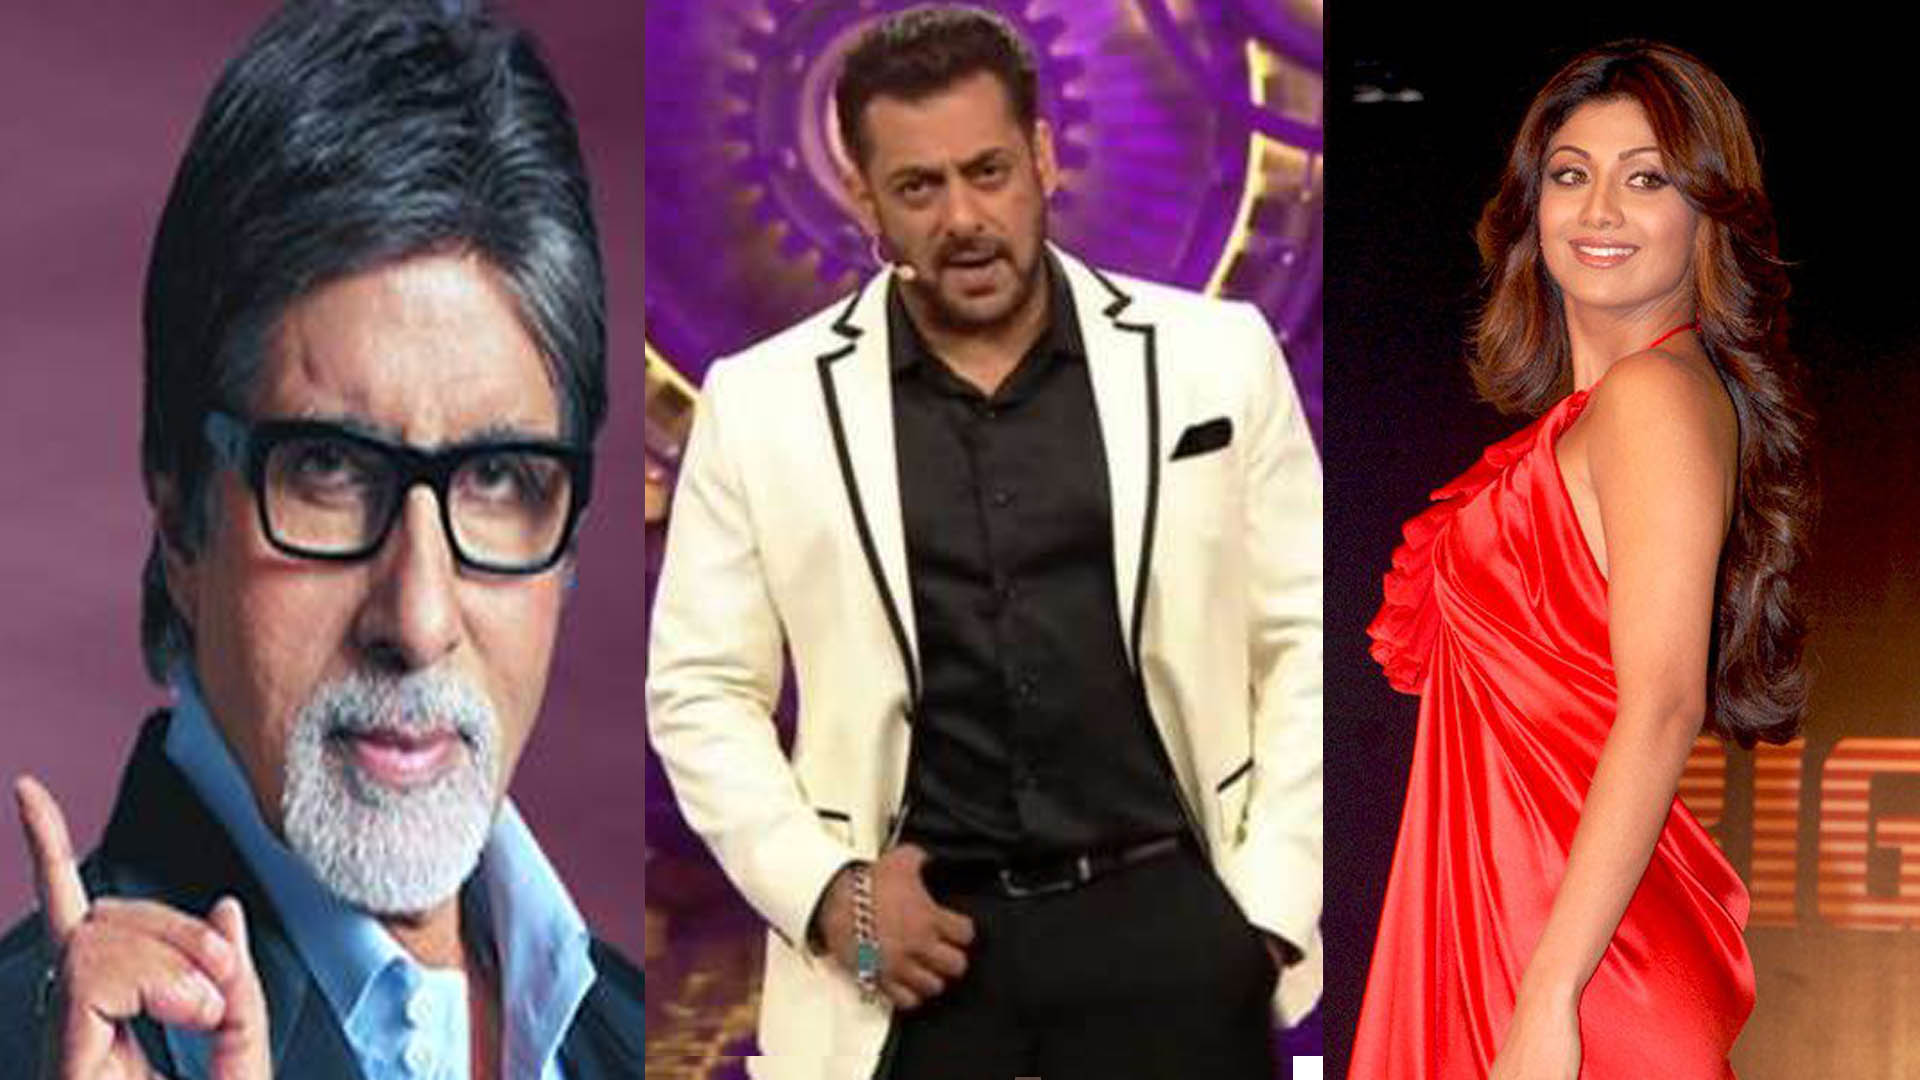 Which season of Bigg Boss got the highest TRPs | Find out the most successful Bigg Boss season